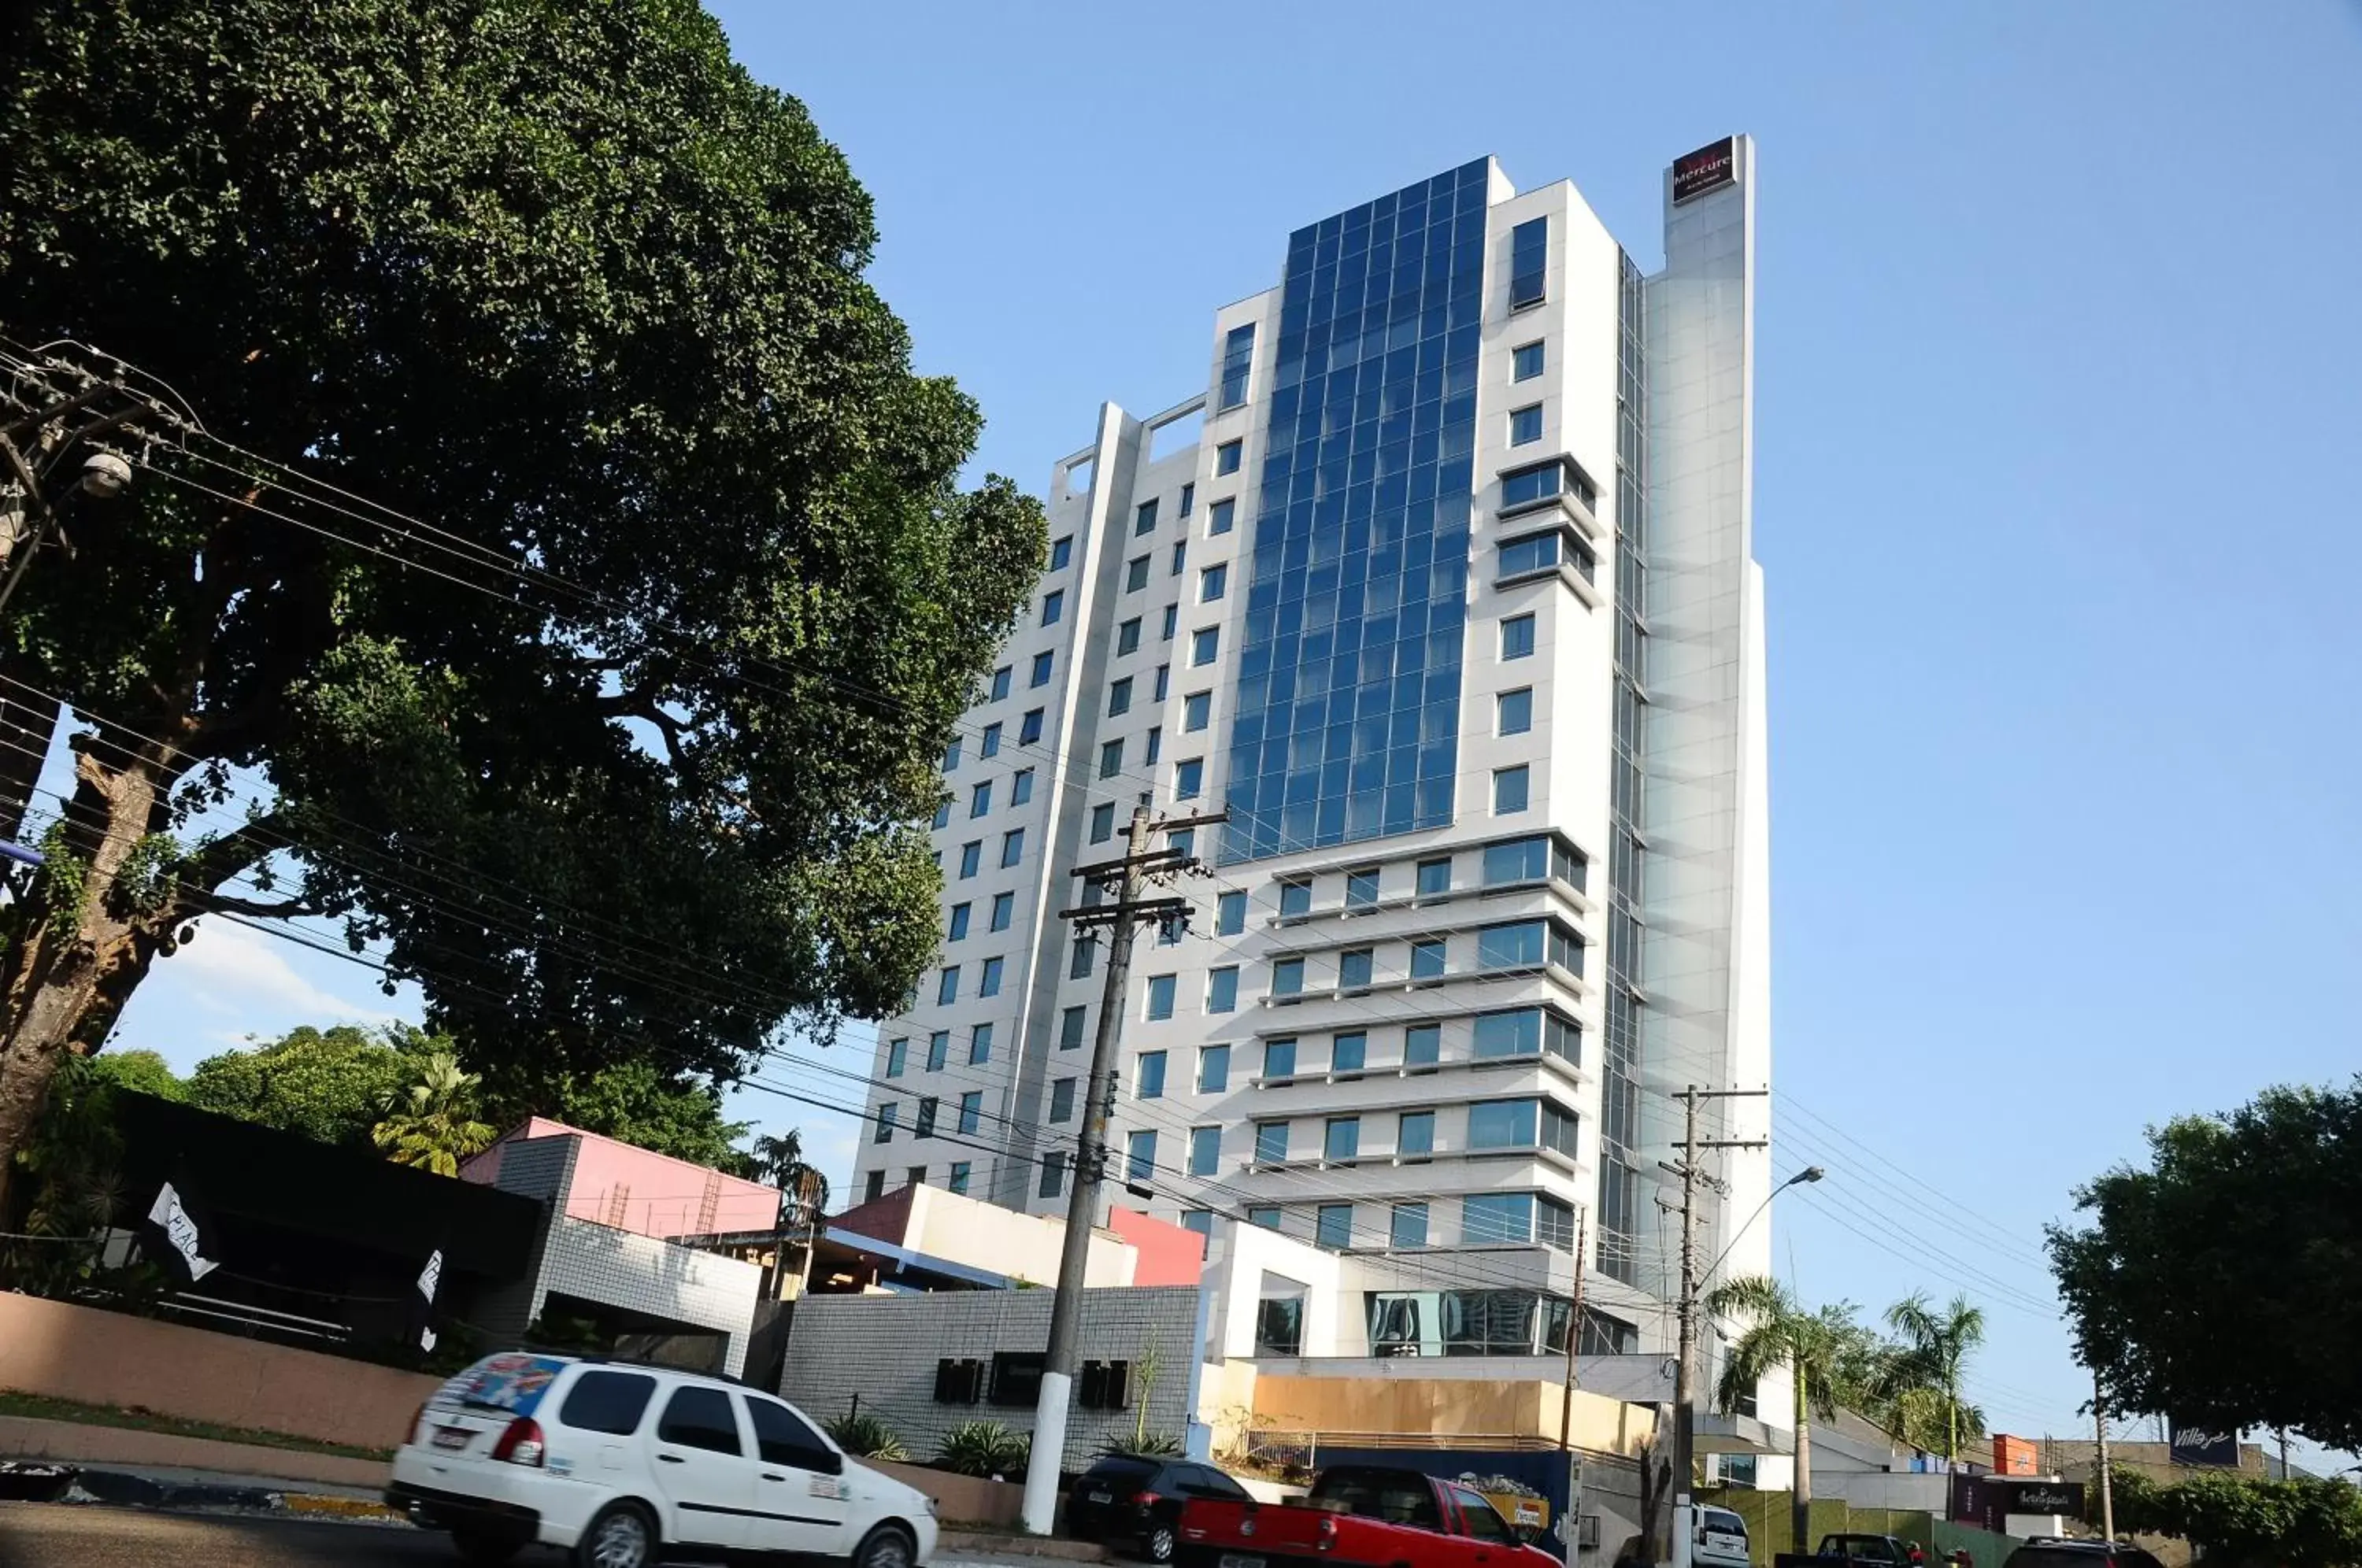 Property Building in Mercure Manaus